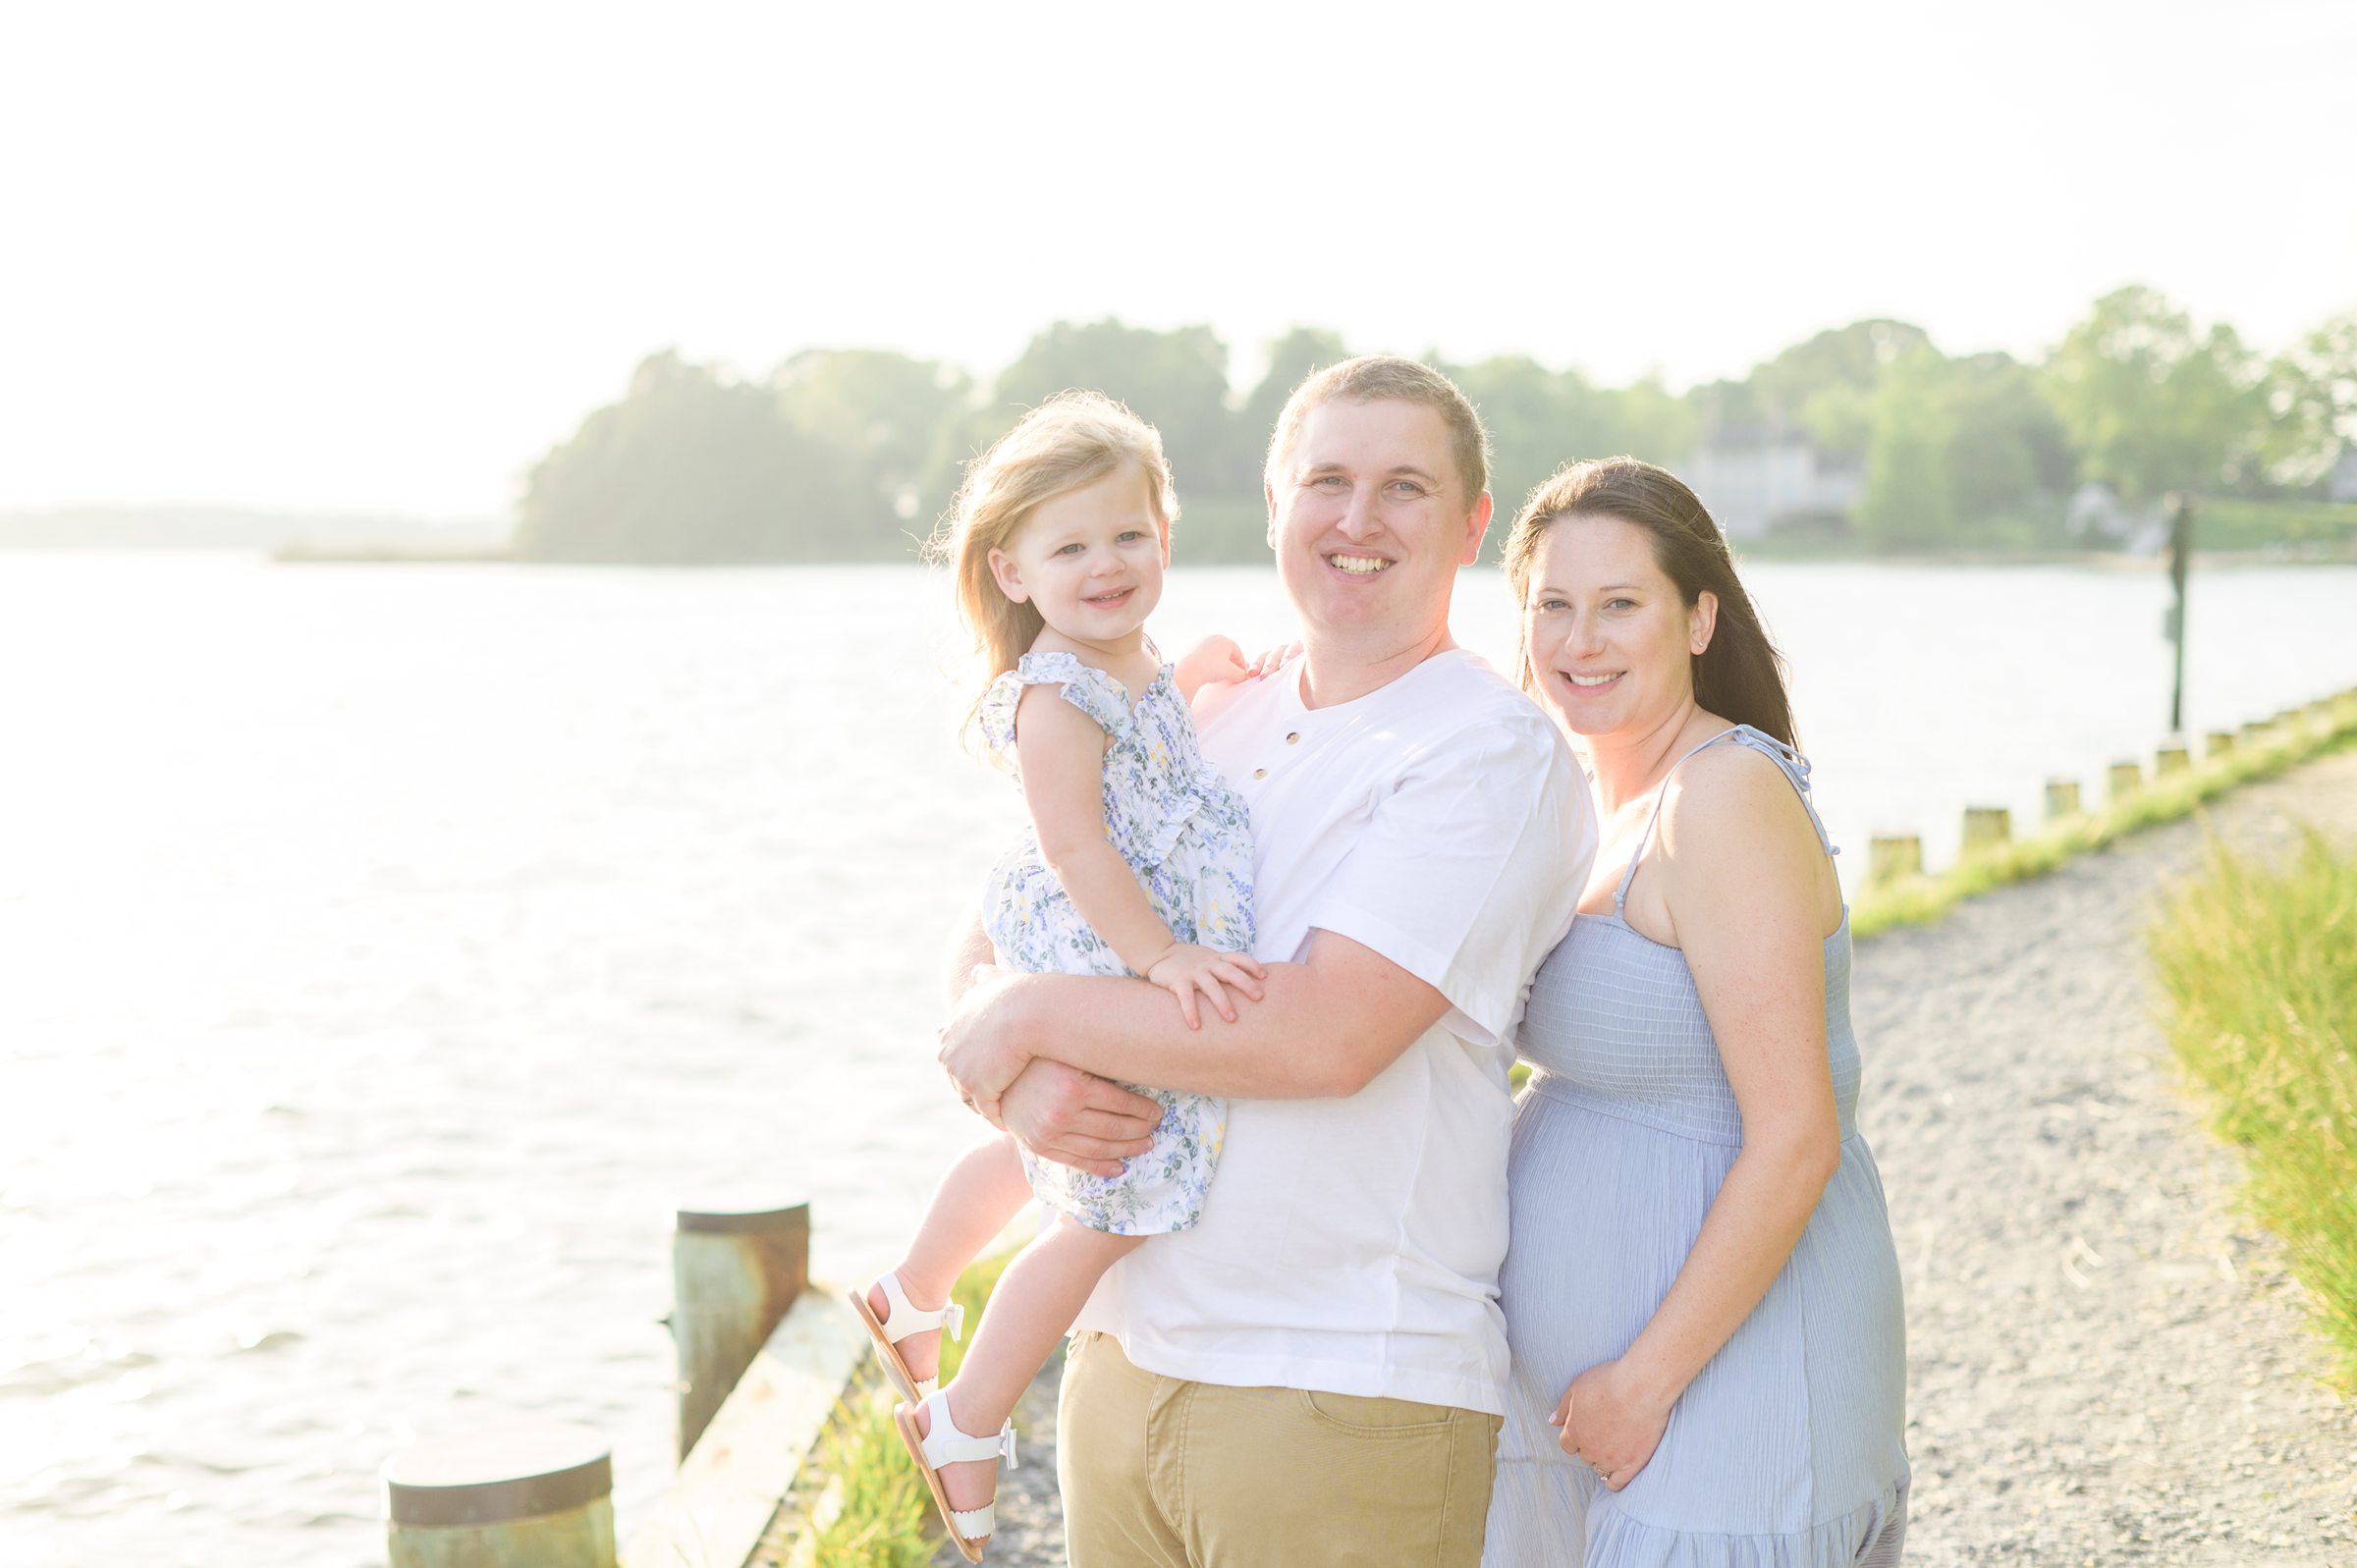 Waterfront maternity portrait session photographed by Baltimore Maternity and Newborn Photographer Cait Kramer.